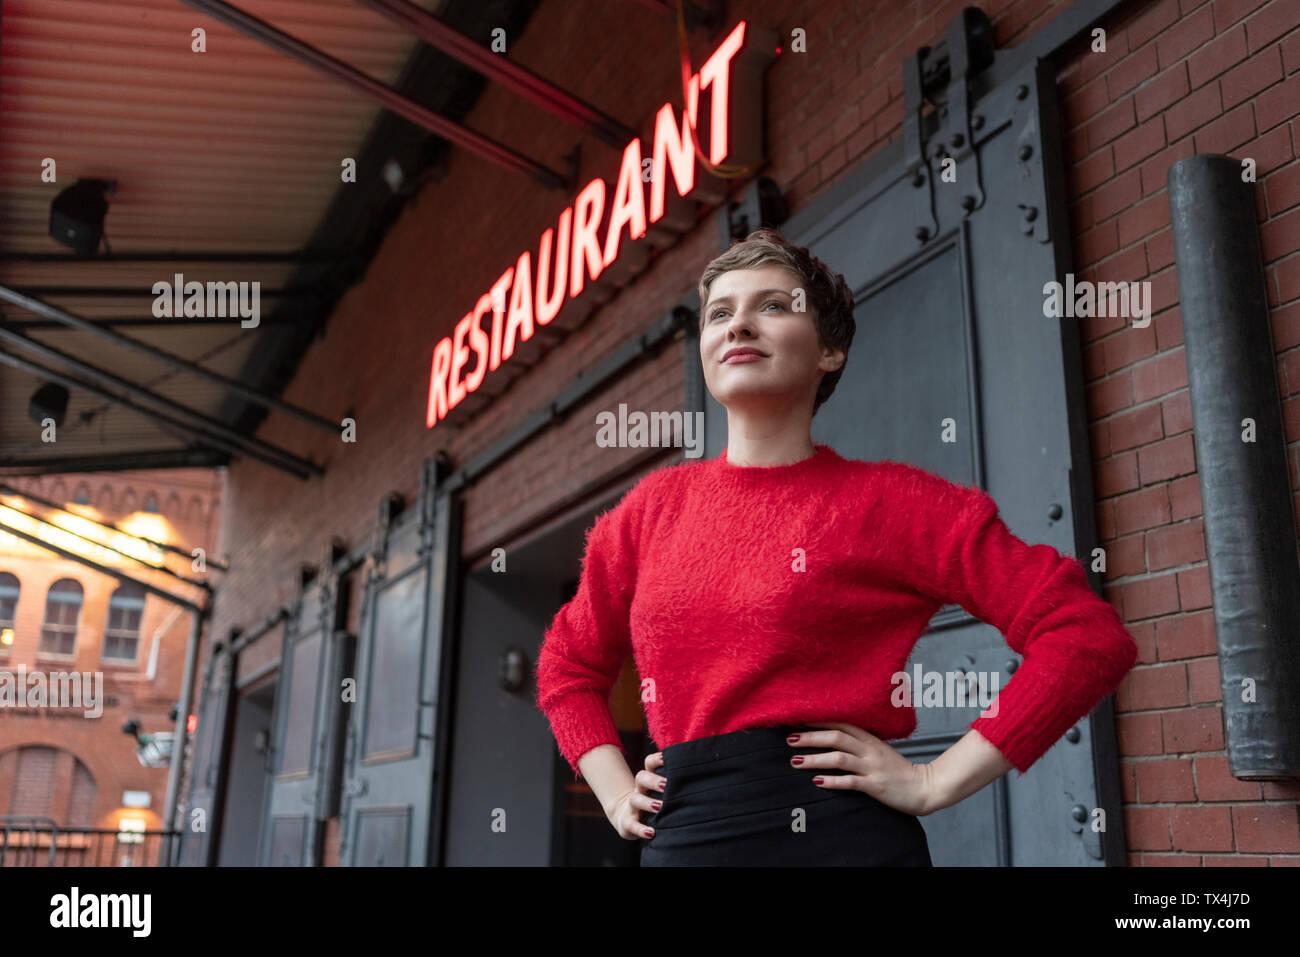 Germany, Berlin, portrait of confident restaurant manager outdoors Stock Photo